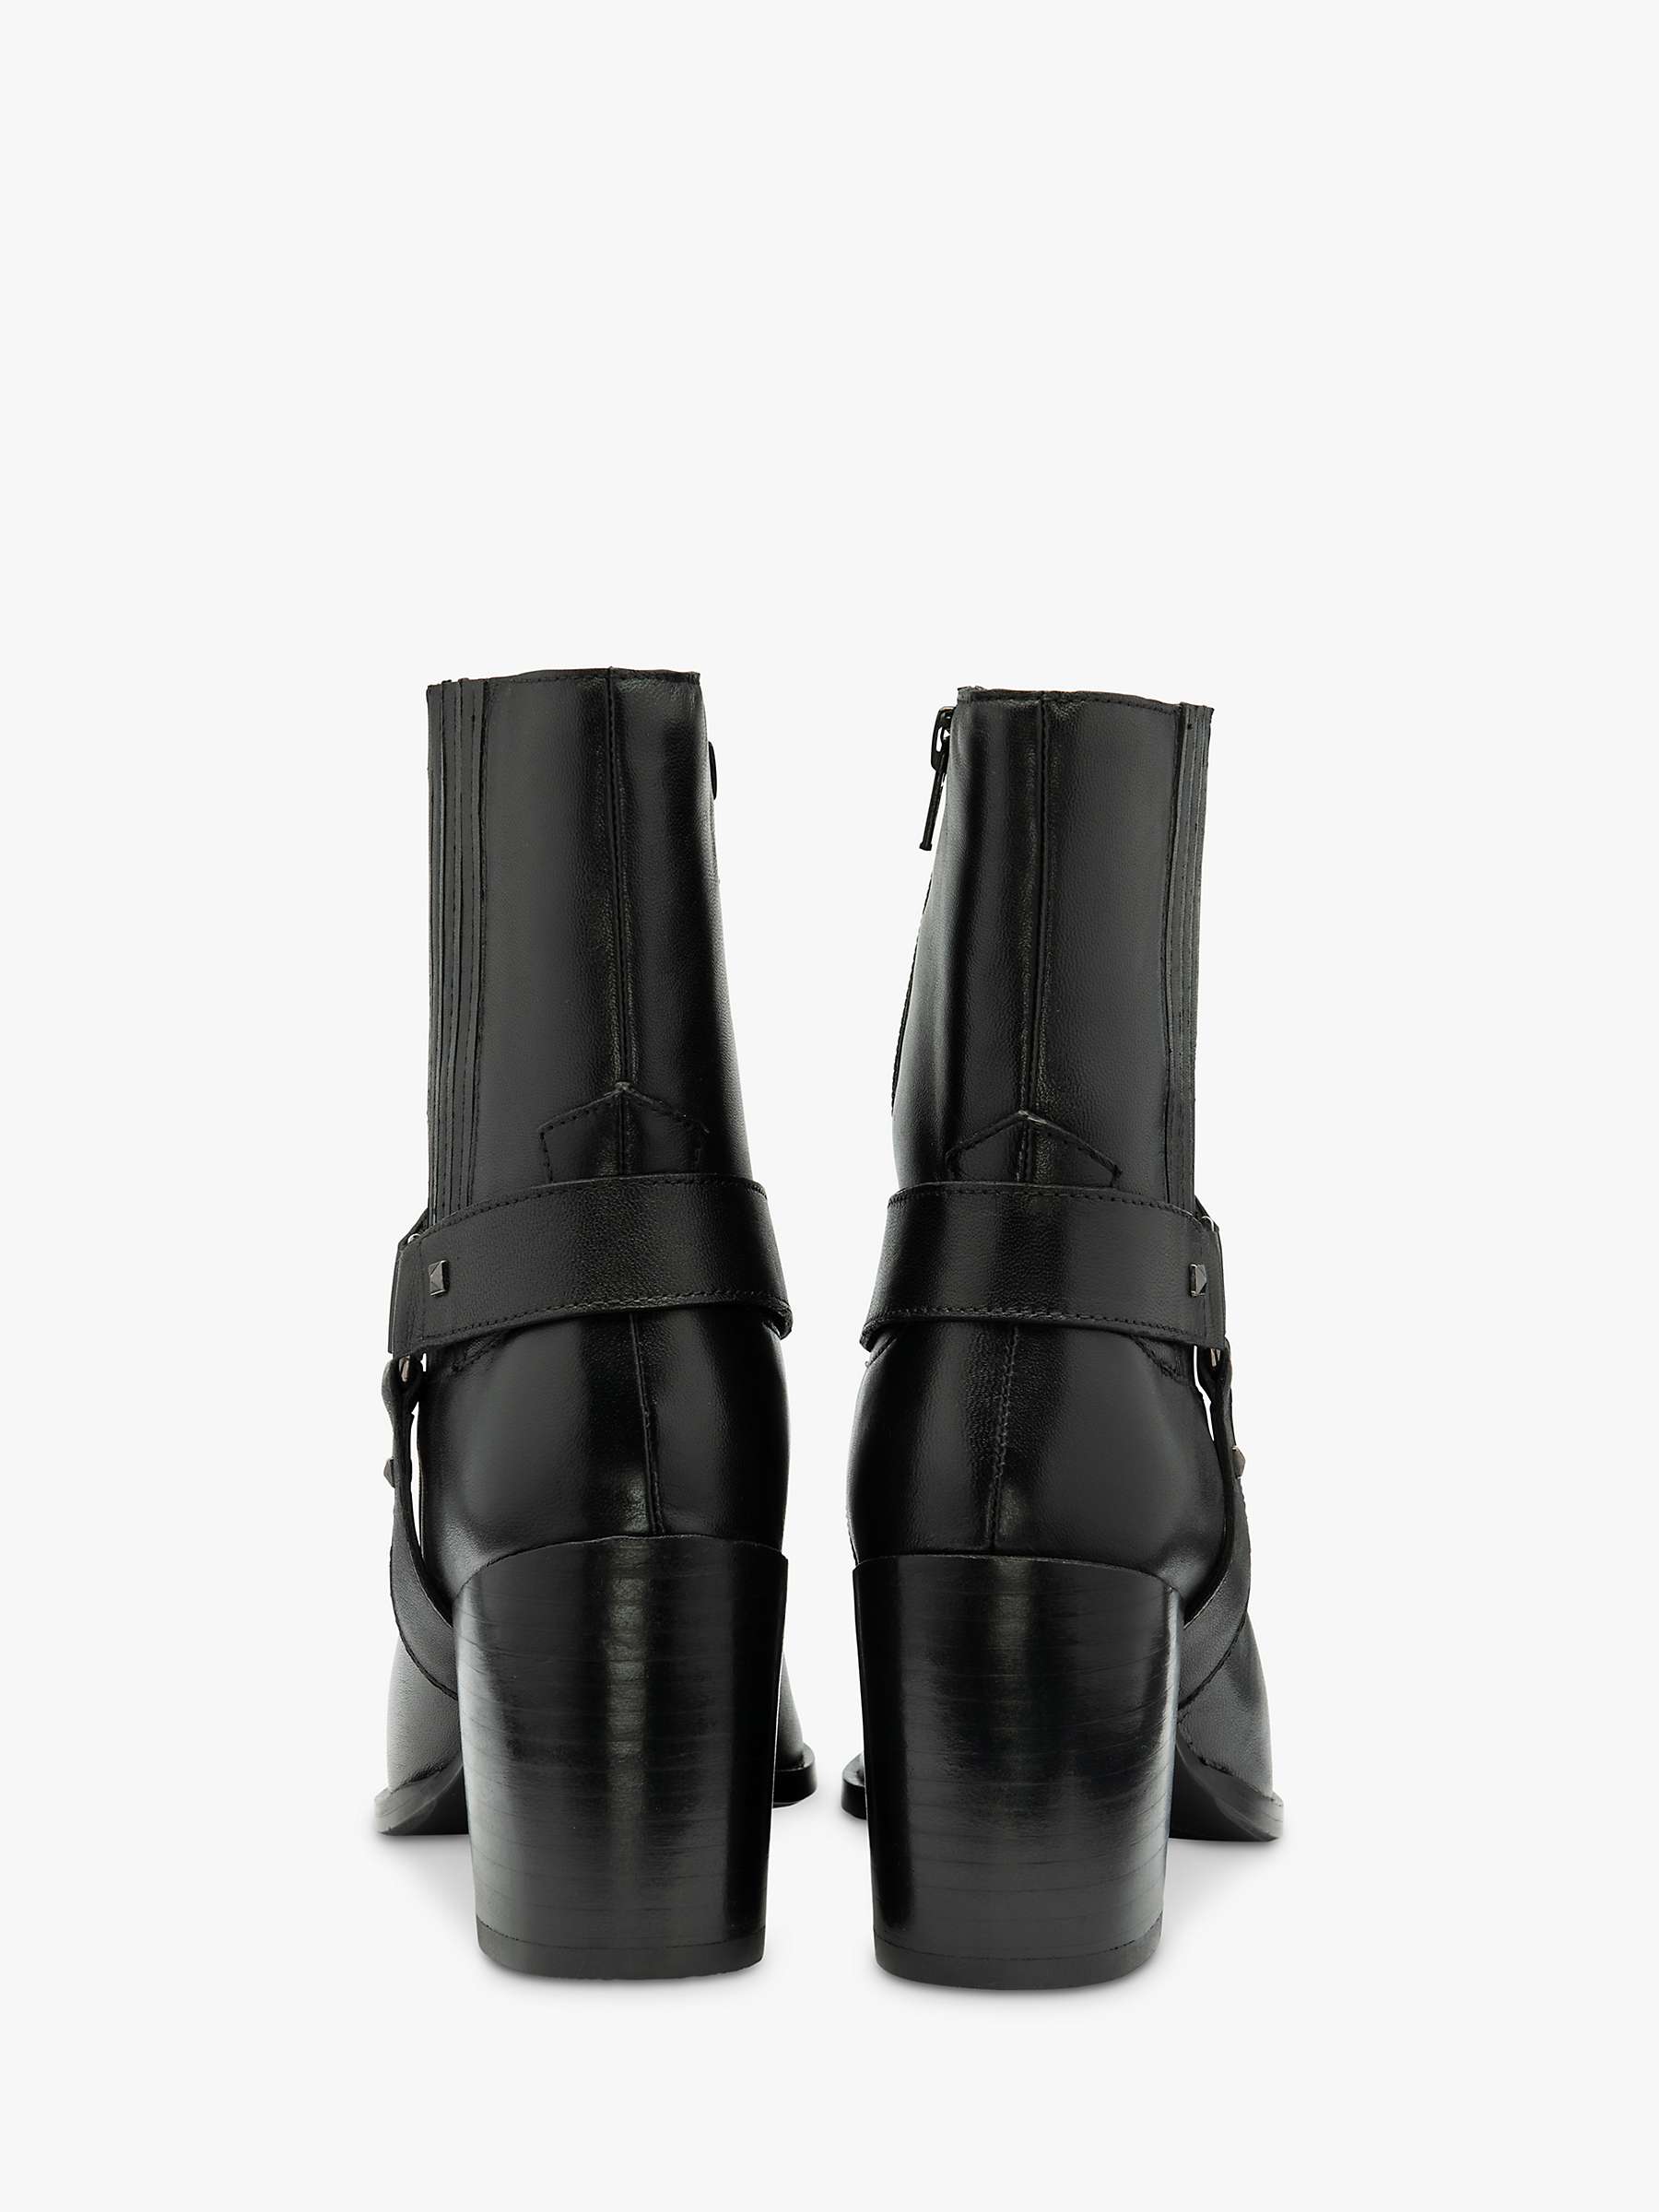 Buy Ravel Ohey Black Leather Ankle Boots Online at johnlewis.com